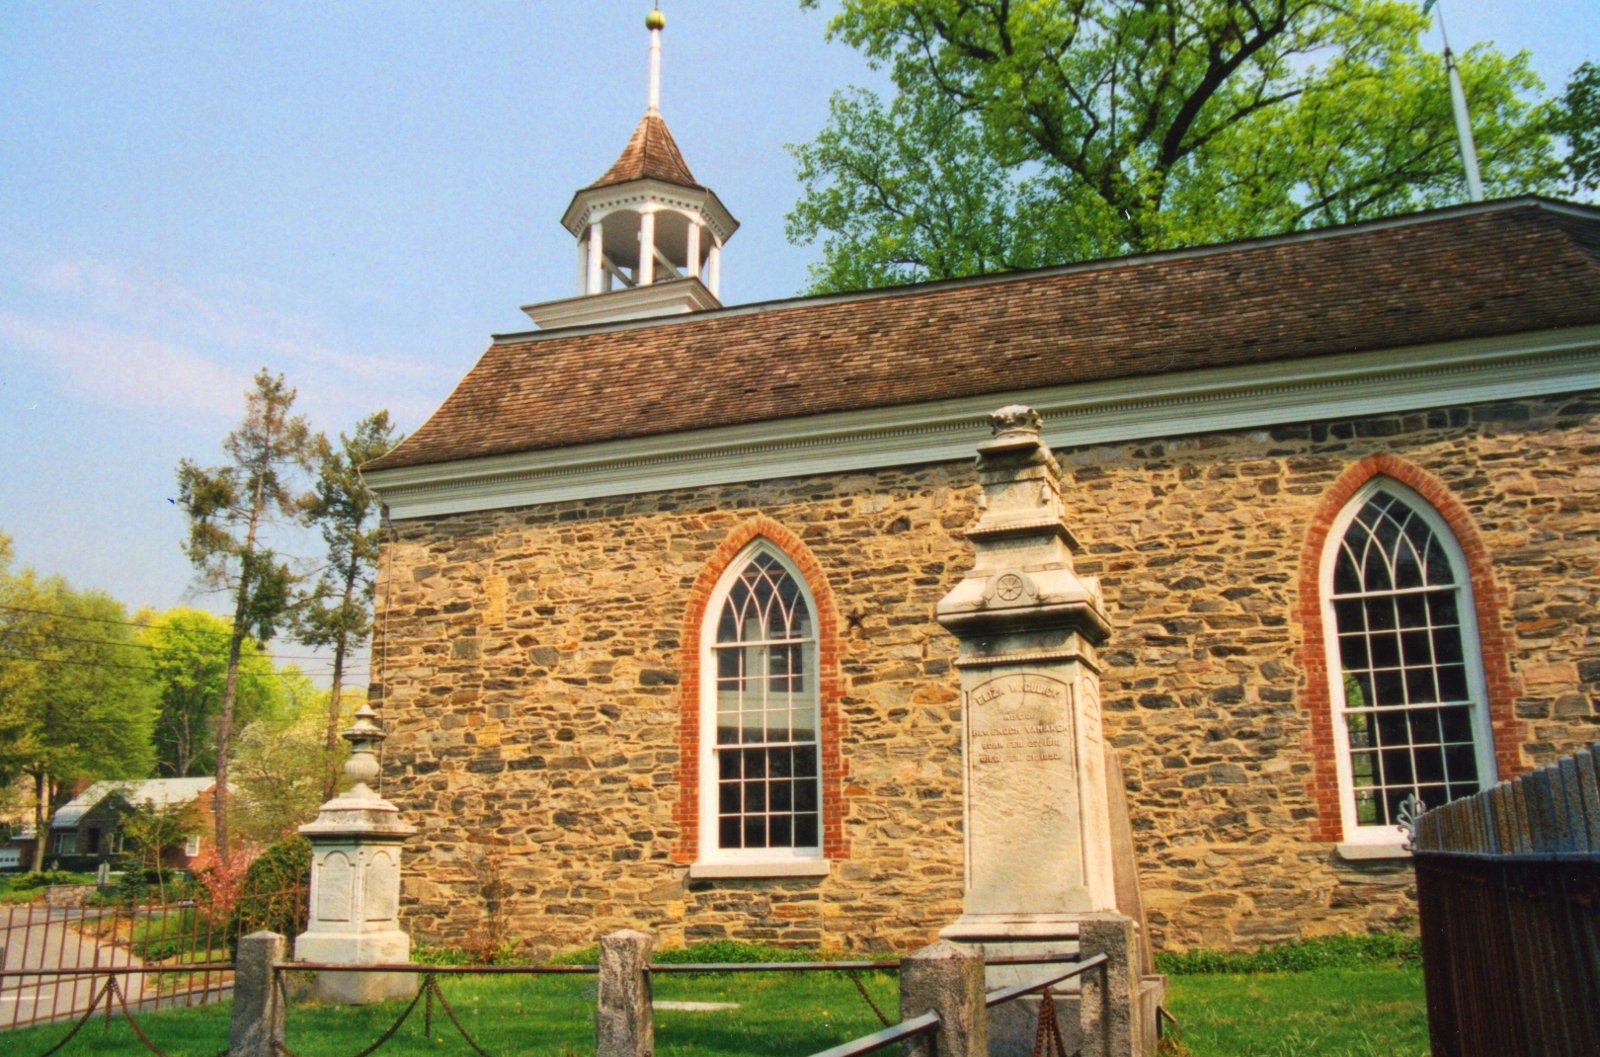 Sleepy Hollow's most recognizeable landmark: the Old Dutch Church and Burying Ground.